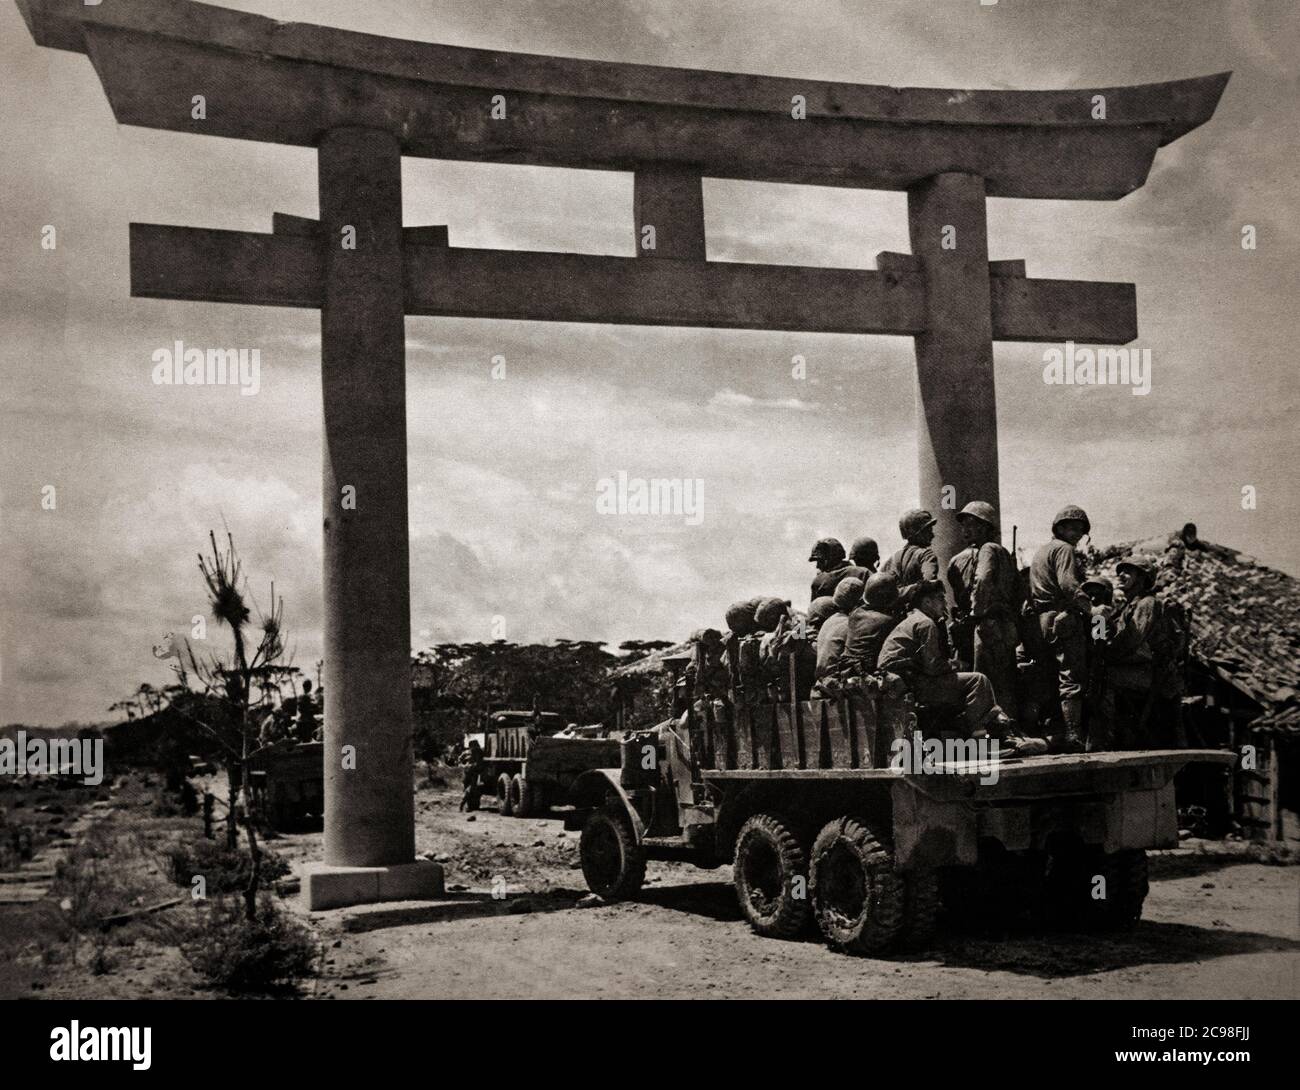 Units of the US 15th Regiment, 6th Marines Division, enter Naha, capital of Okinawa through a torii, a traditional Japanese gate as the war in the Pacific draws to a close in 1945. Stock Photo